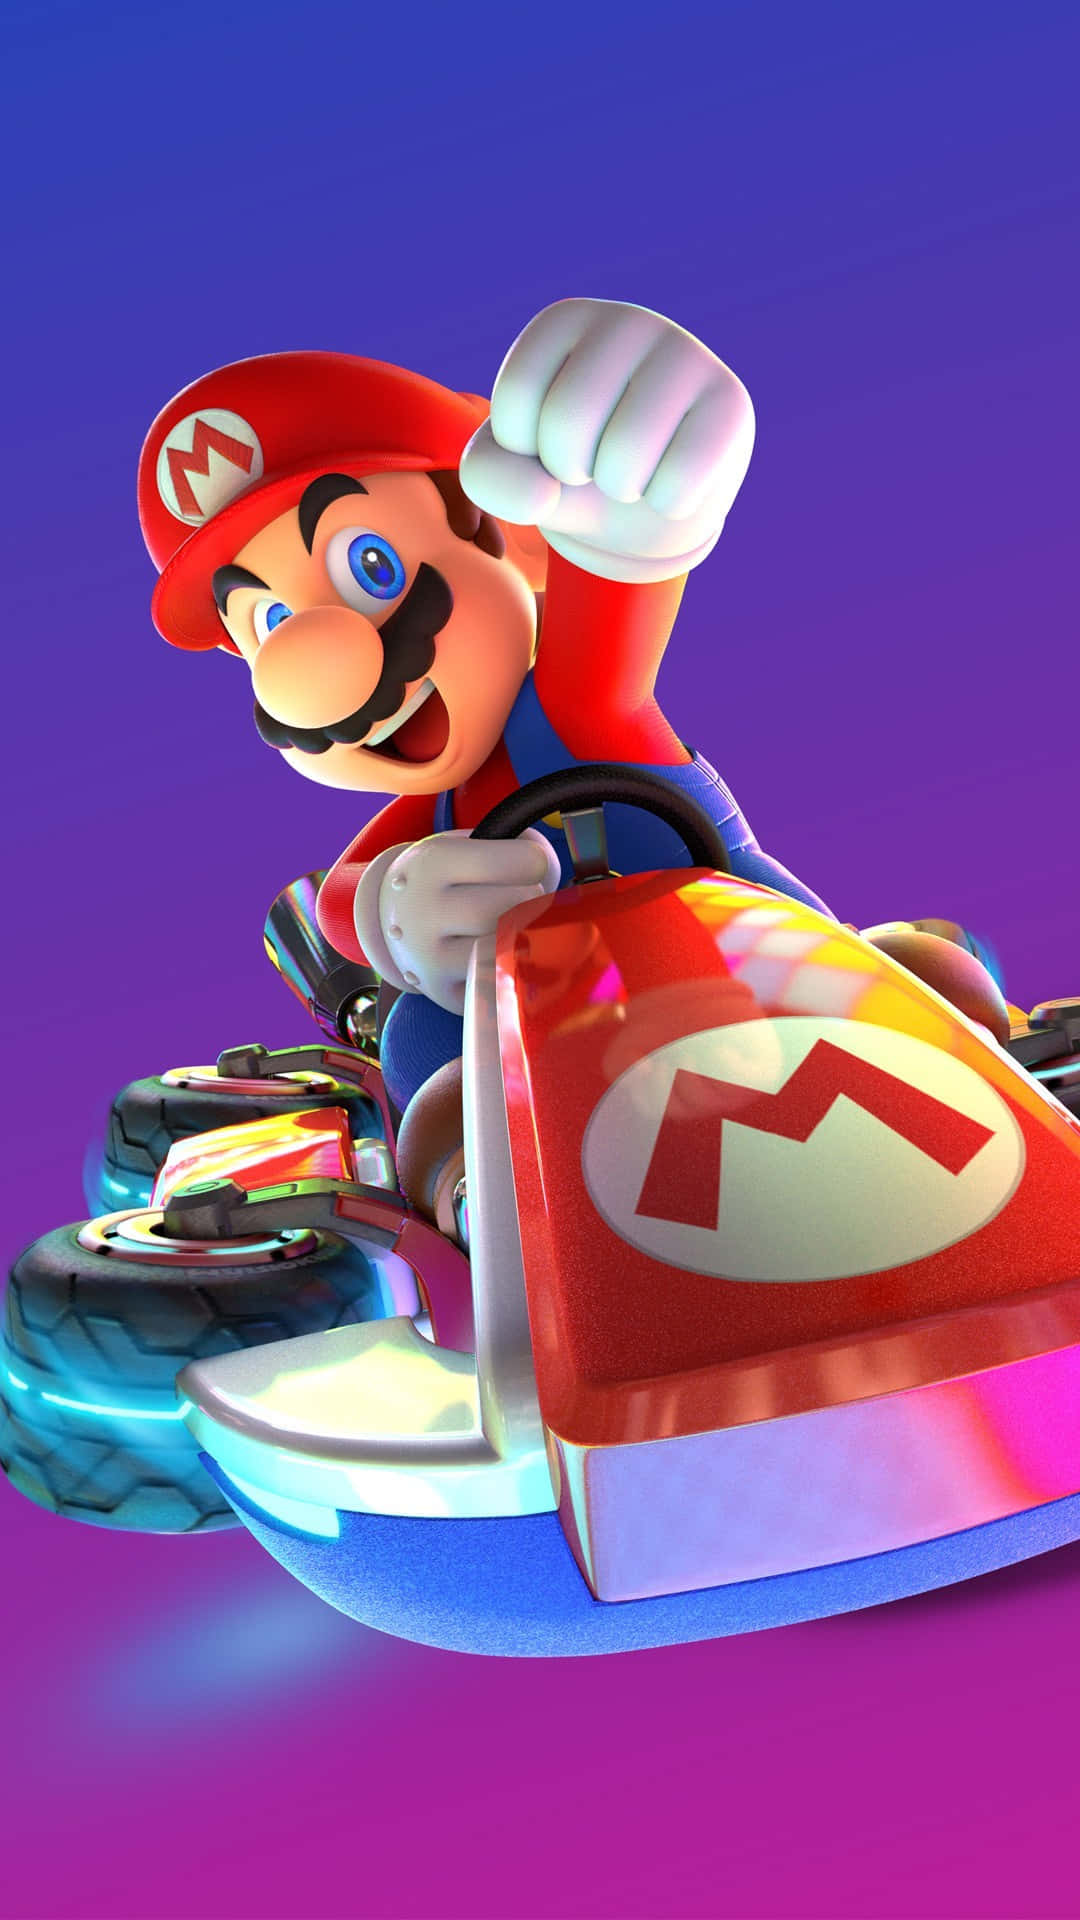 Unlock the world of gaming on your phone with Super Mario for iPhone! Wallpaper